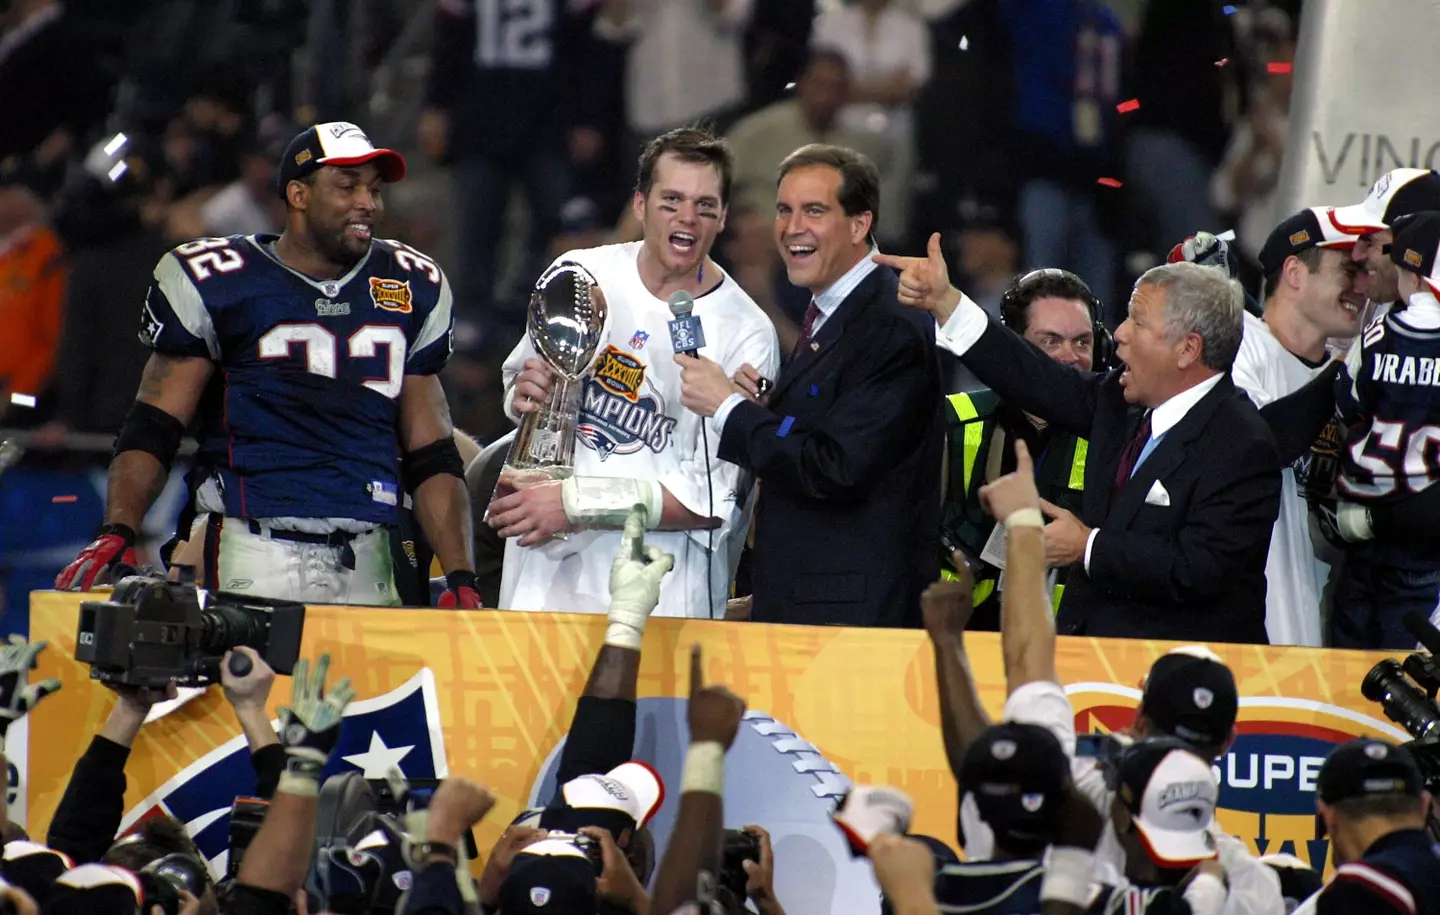 Tom Brady and the New England Patriots won the Super Bowl that year.